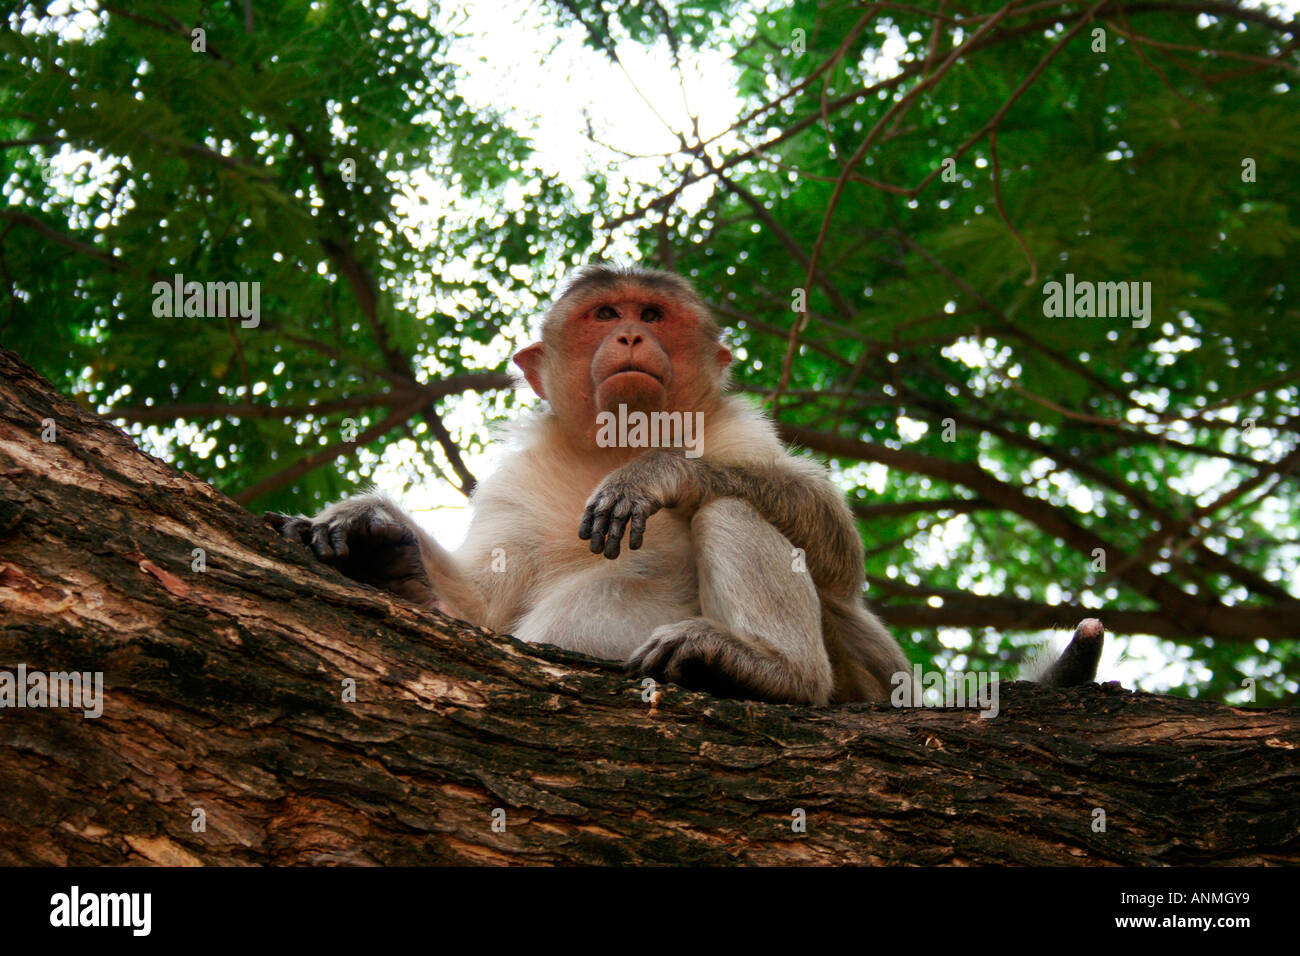 Close up of a monkey sitting on the branch of a tree watching something intently Stock Photo